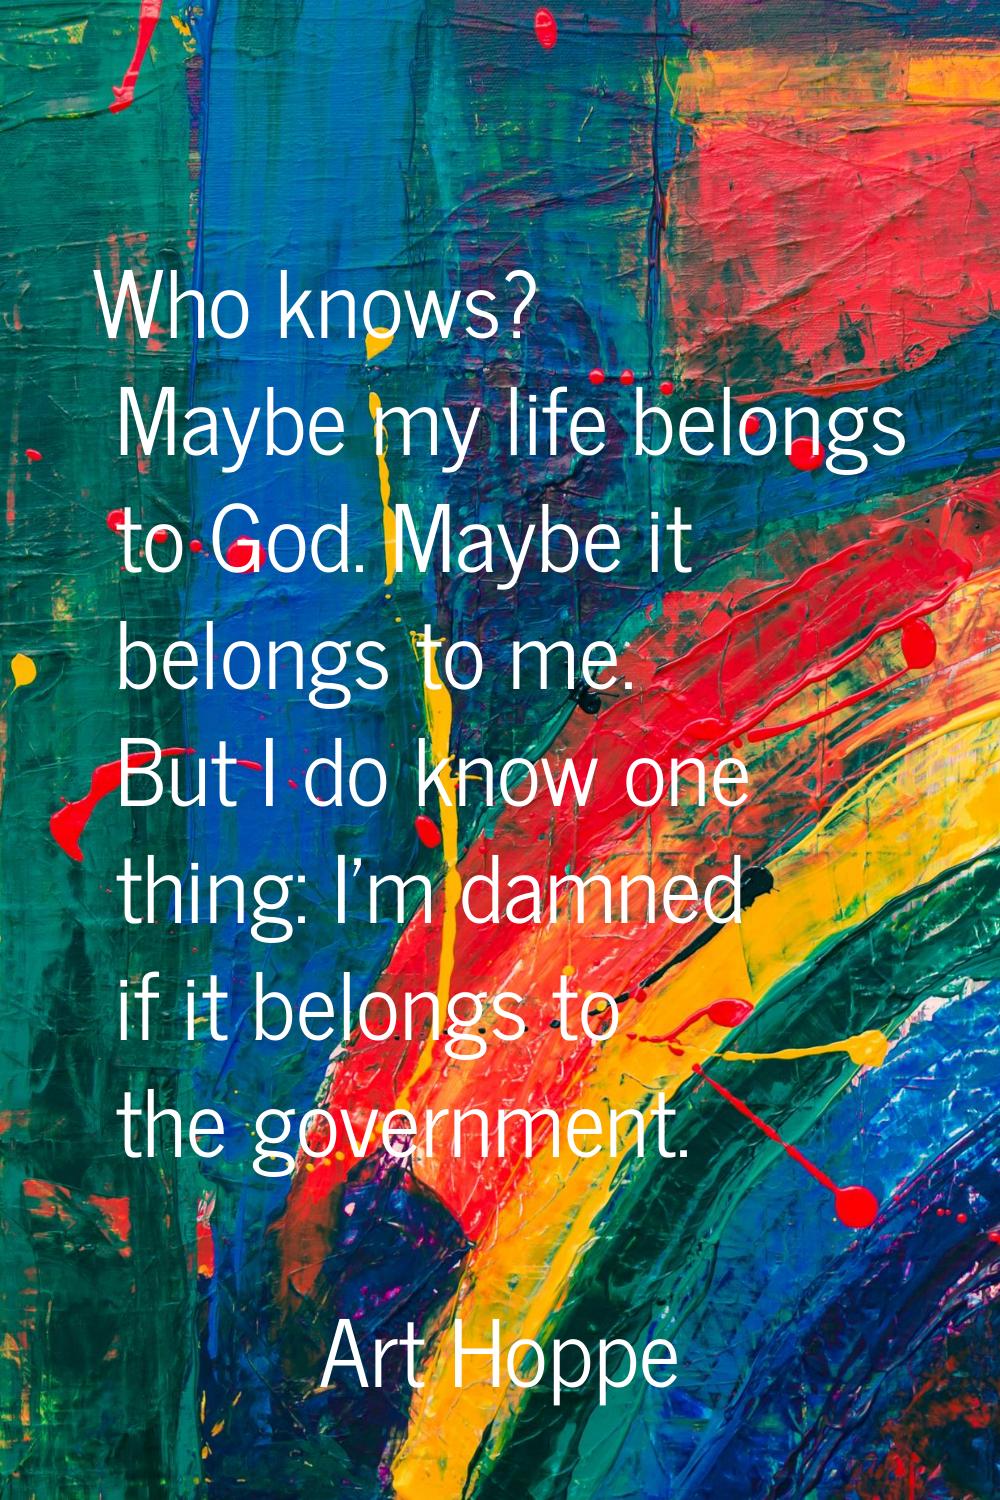 Who knows? Maybe my life belongs to God. Maybe it belongs to me. But I do know one thing: I'm damne